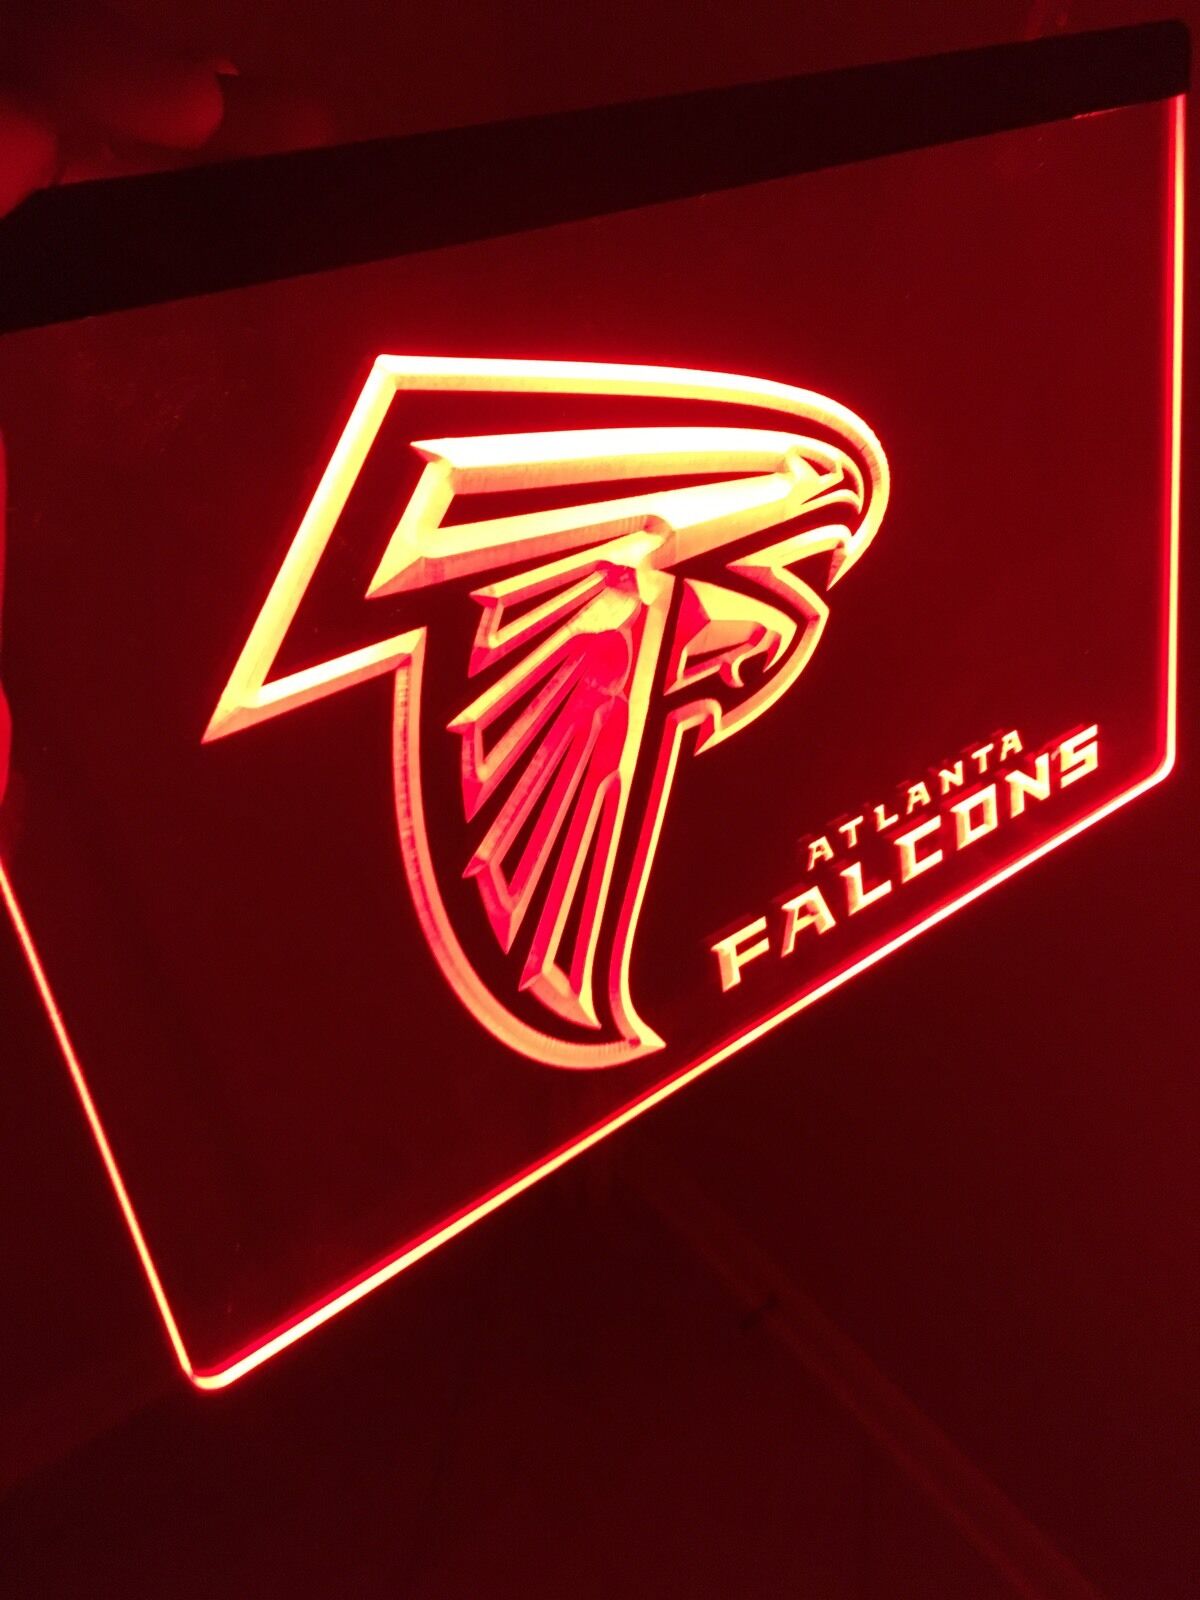 NFL Atlanta FALCONS LED Neon Sign for Game Room,Office,Bar,Man Cave, Decor.